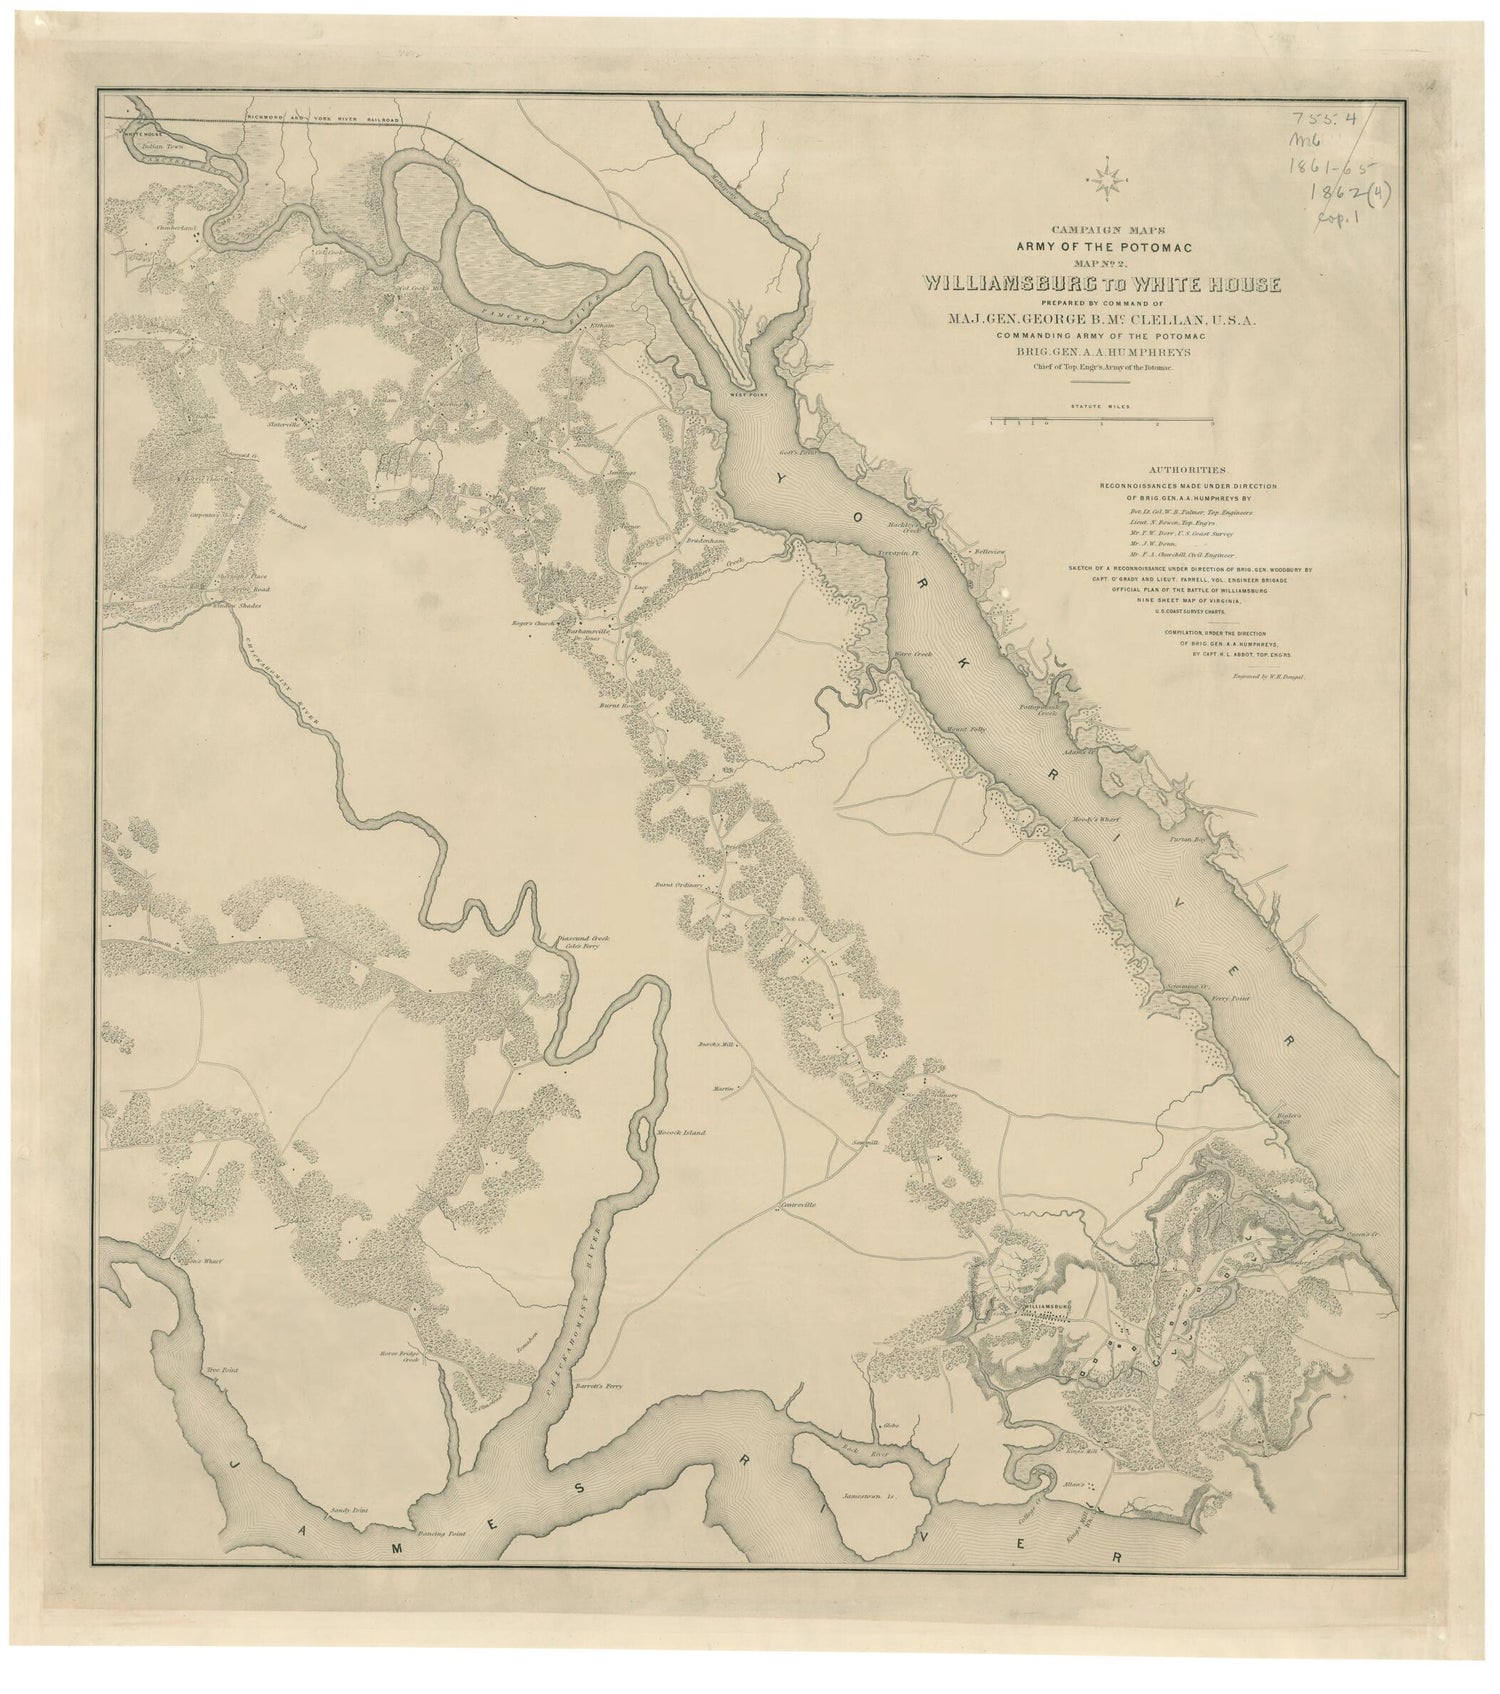 This old map of Williamsburg to White House (Campaign Map, Army of the Potomac, Map No. 2) from 1862 was created by Henry L. Abbot, William H. Dougal,  United States. Army of the Potomac. Engineer Dept in 1862